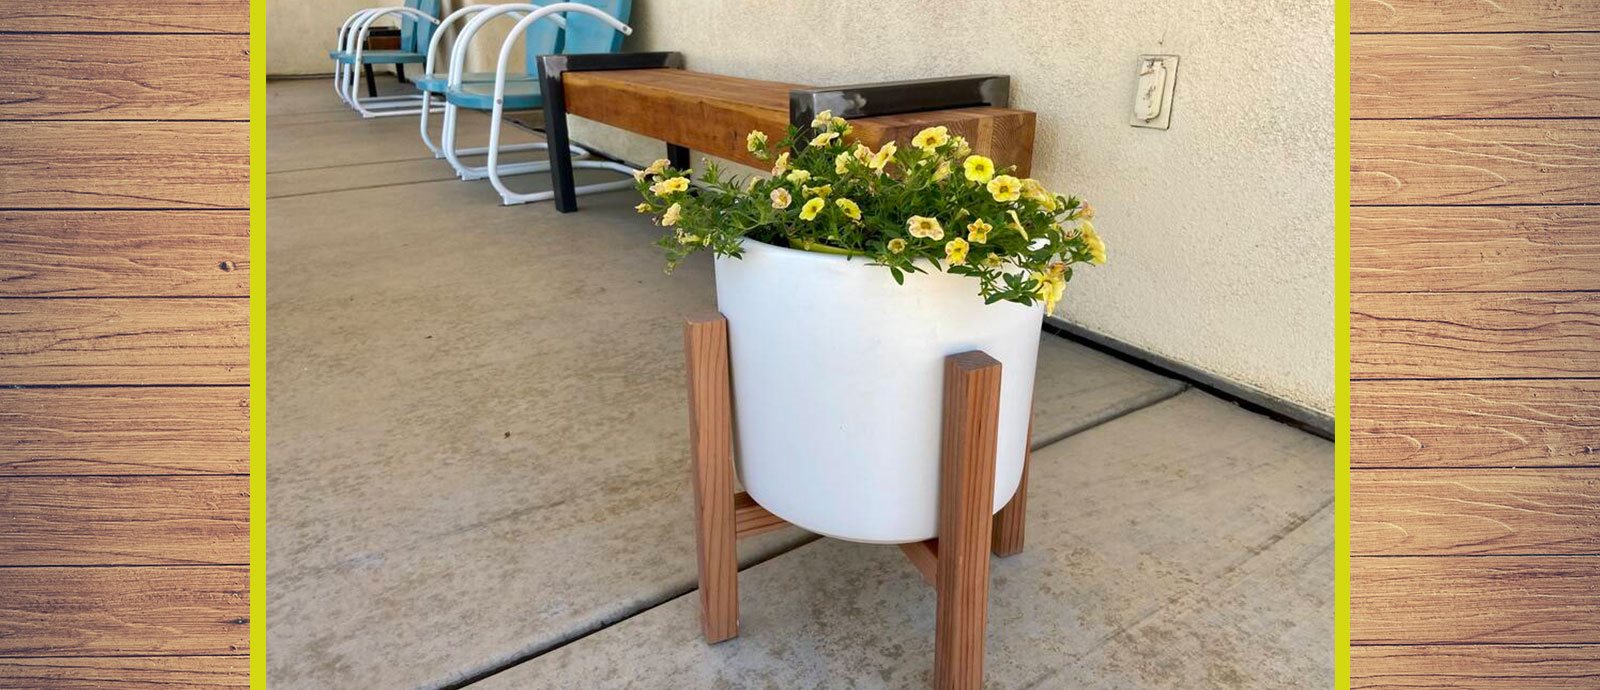 How to Build a DIY Potted Plant Stand